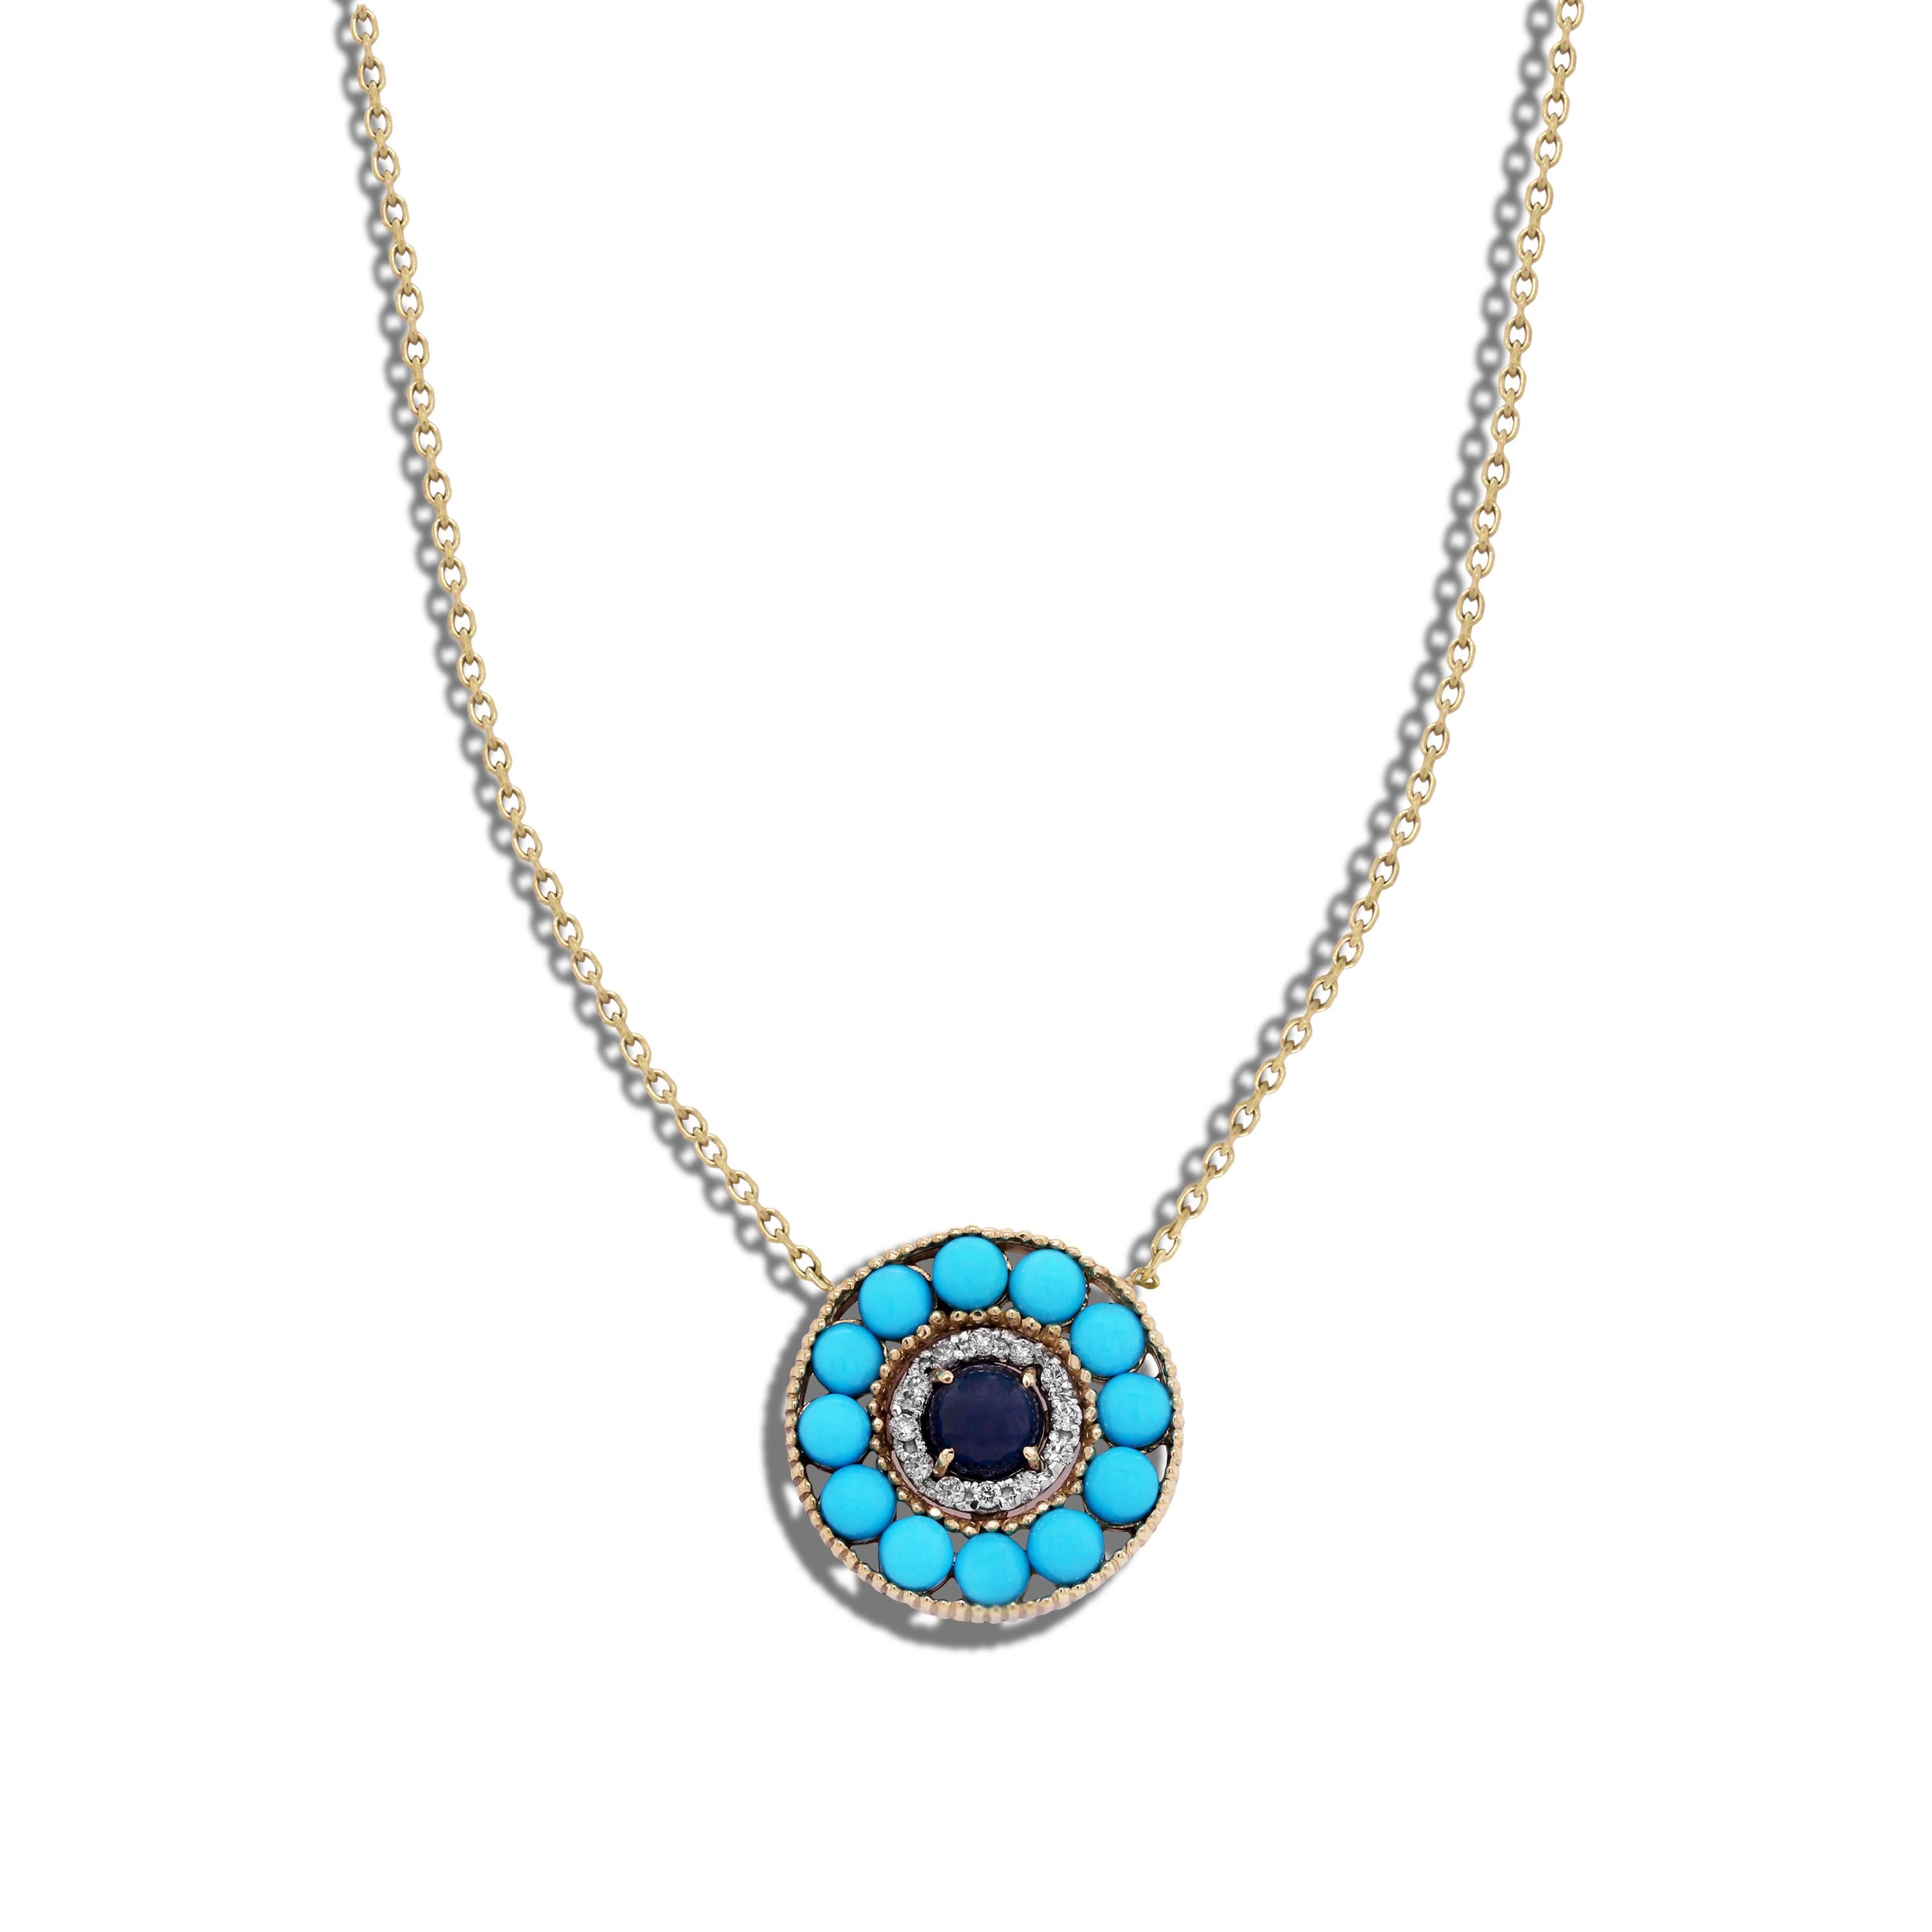 18K Yellow Gold and Diamond Evil Eye Pendant with Turquoise and Blue Sapphire by Stambolian

A unique twist on the traditional evil eye. With Sleeping beauty turquoise on the edges along with diamonds, leading to the cabochon-cut, round, blue